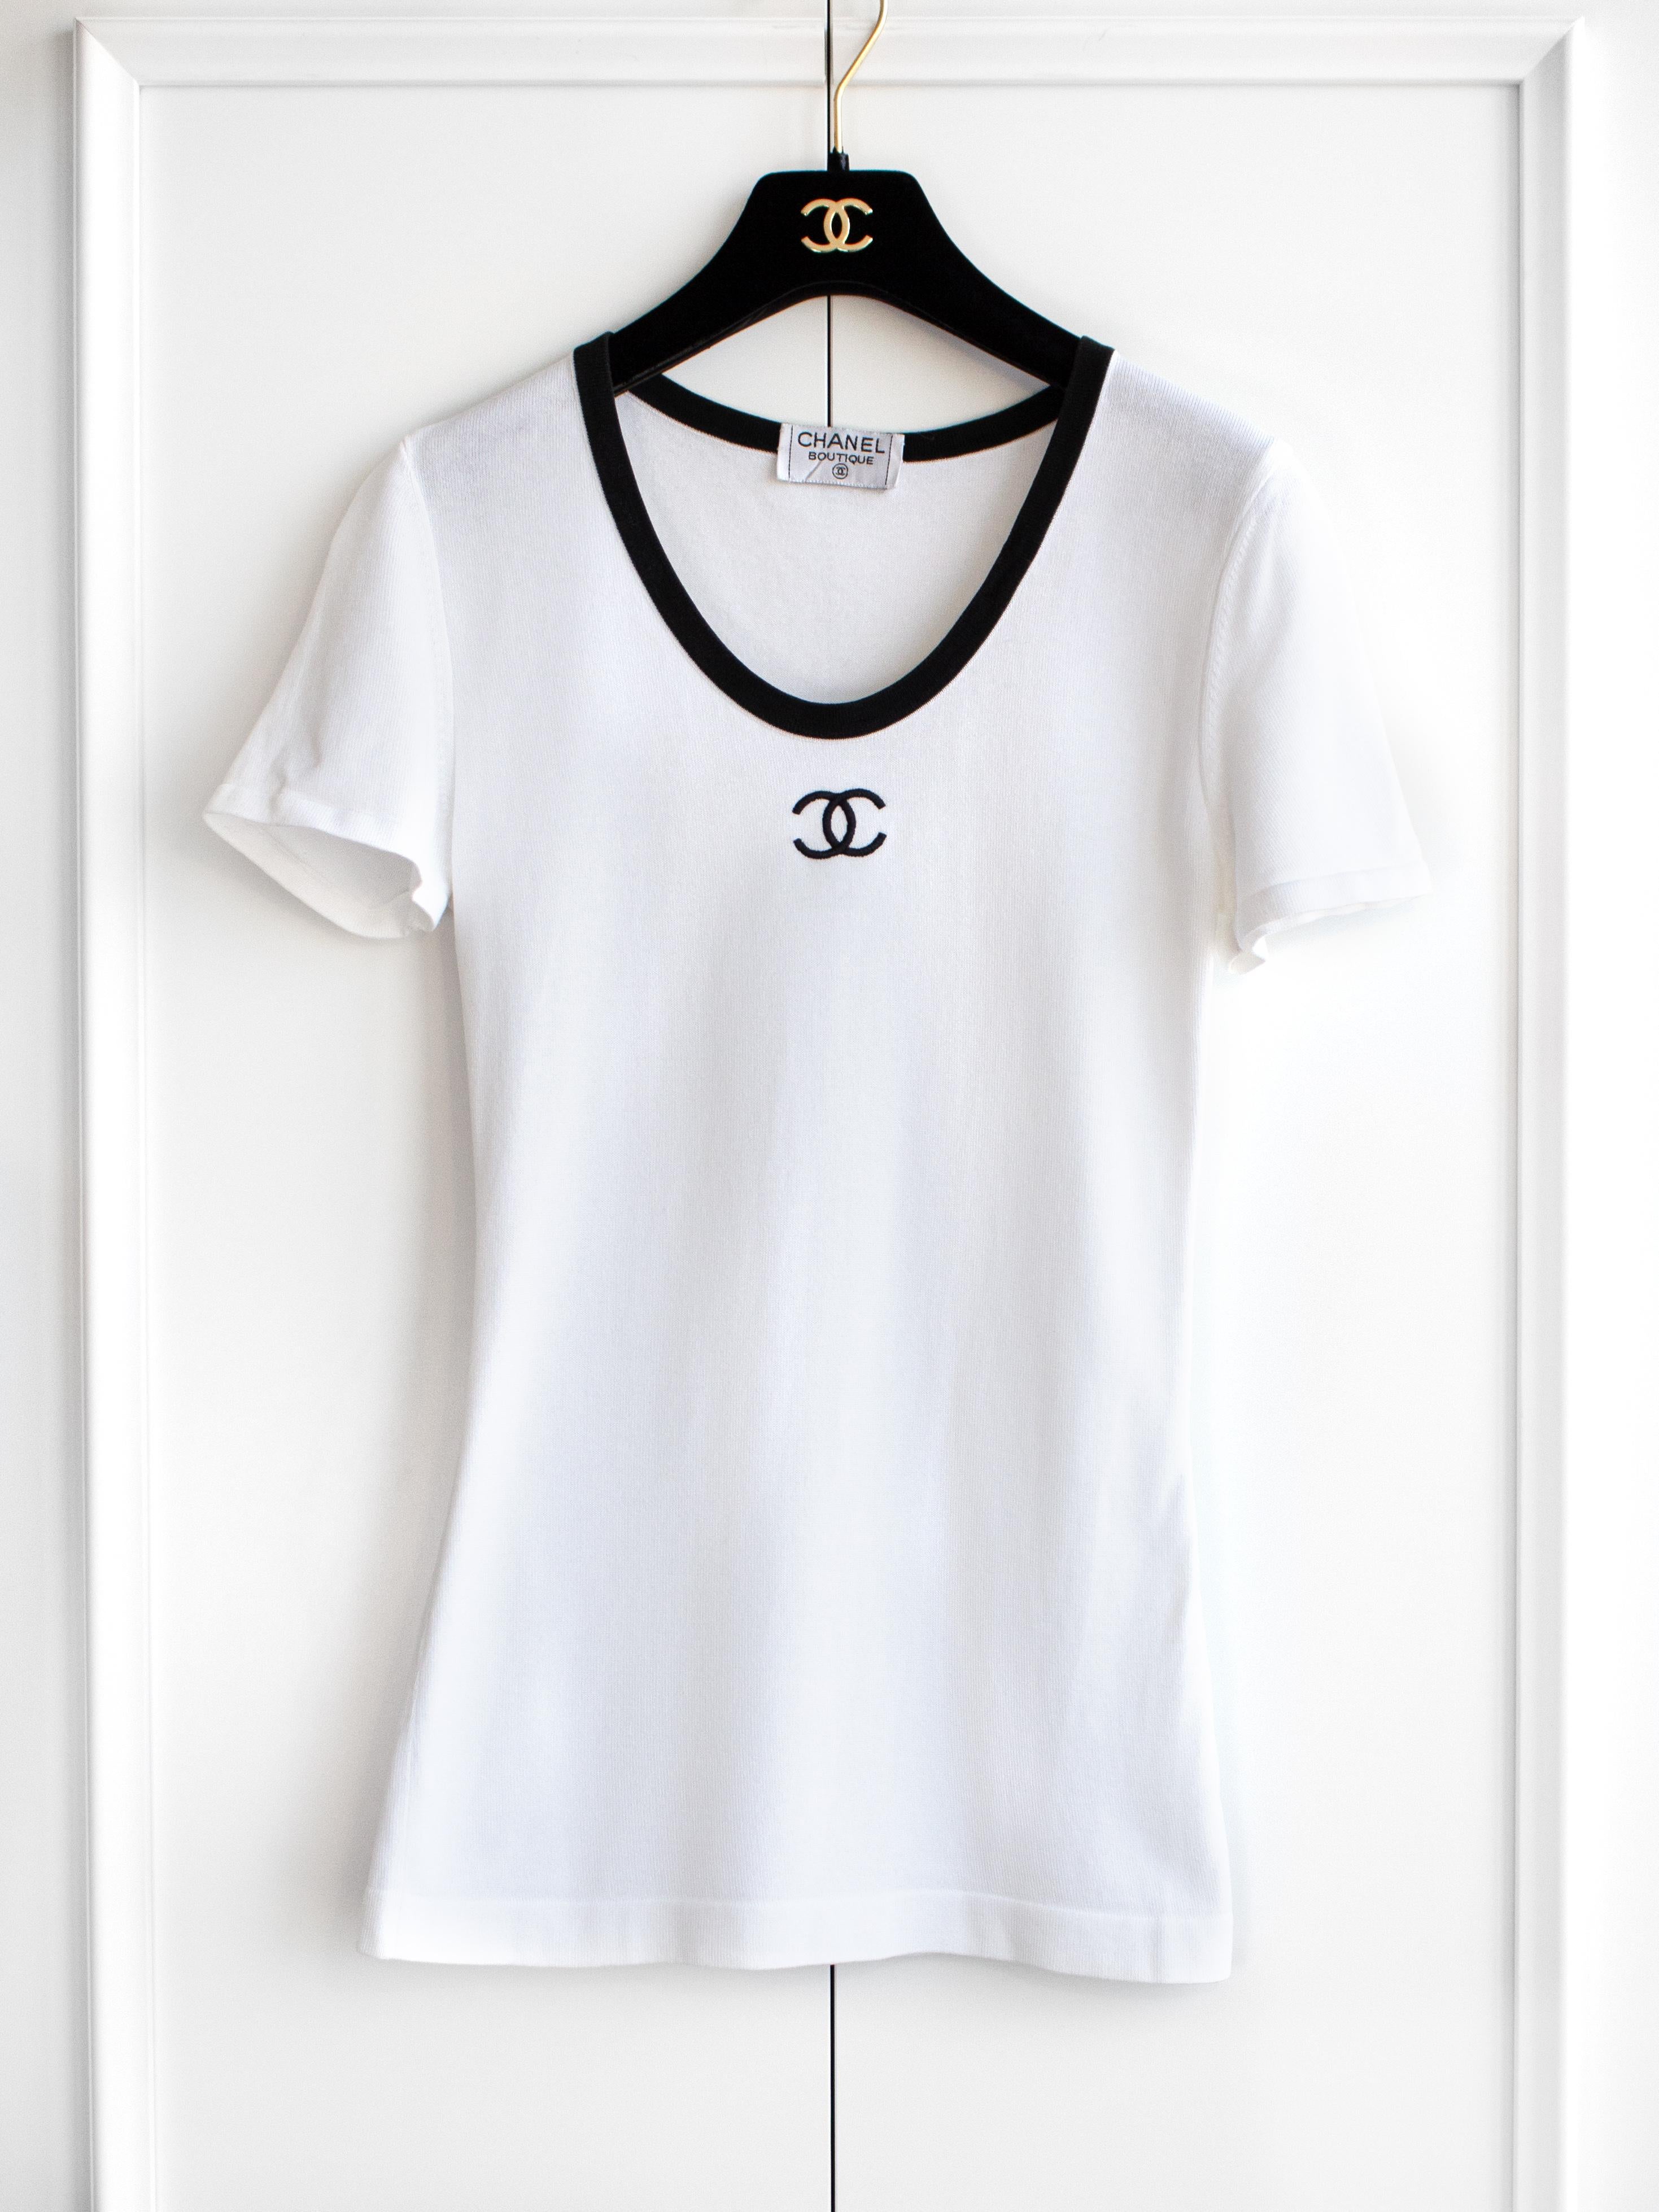 A classic scoop-neck white tee with a contrasting black trim and CC logo from Chanel Spring/Summer 1994 collection. Very good condition, no obvious flaws. Size FR34, stretchy cotton fabric. Composition label is missing. Measurements: bust 32